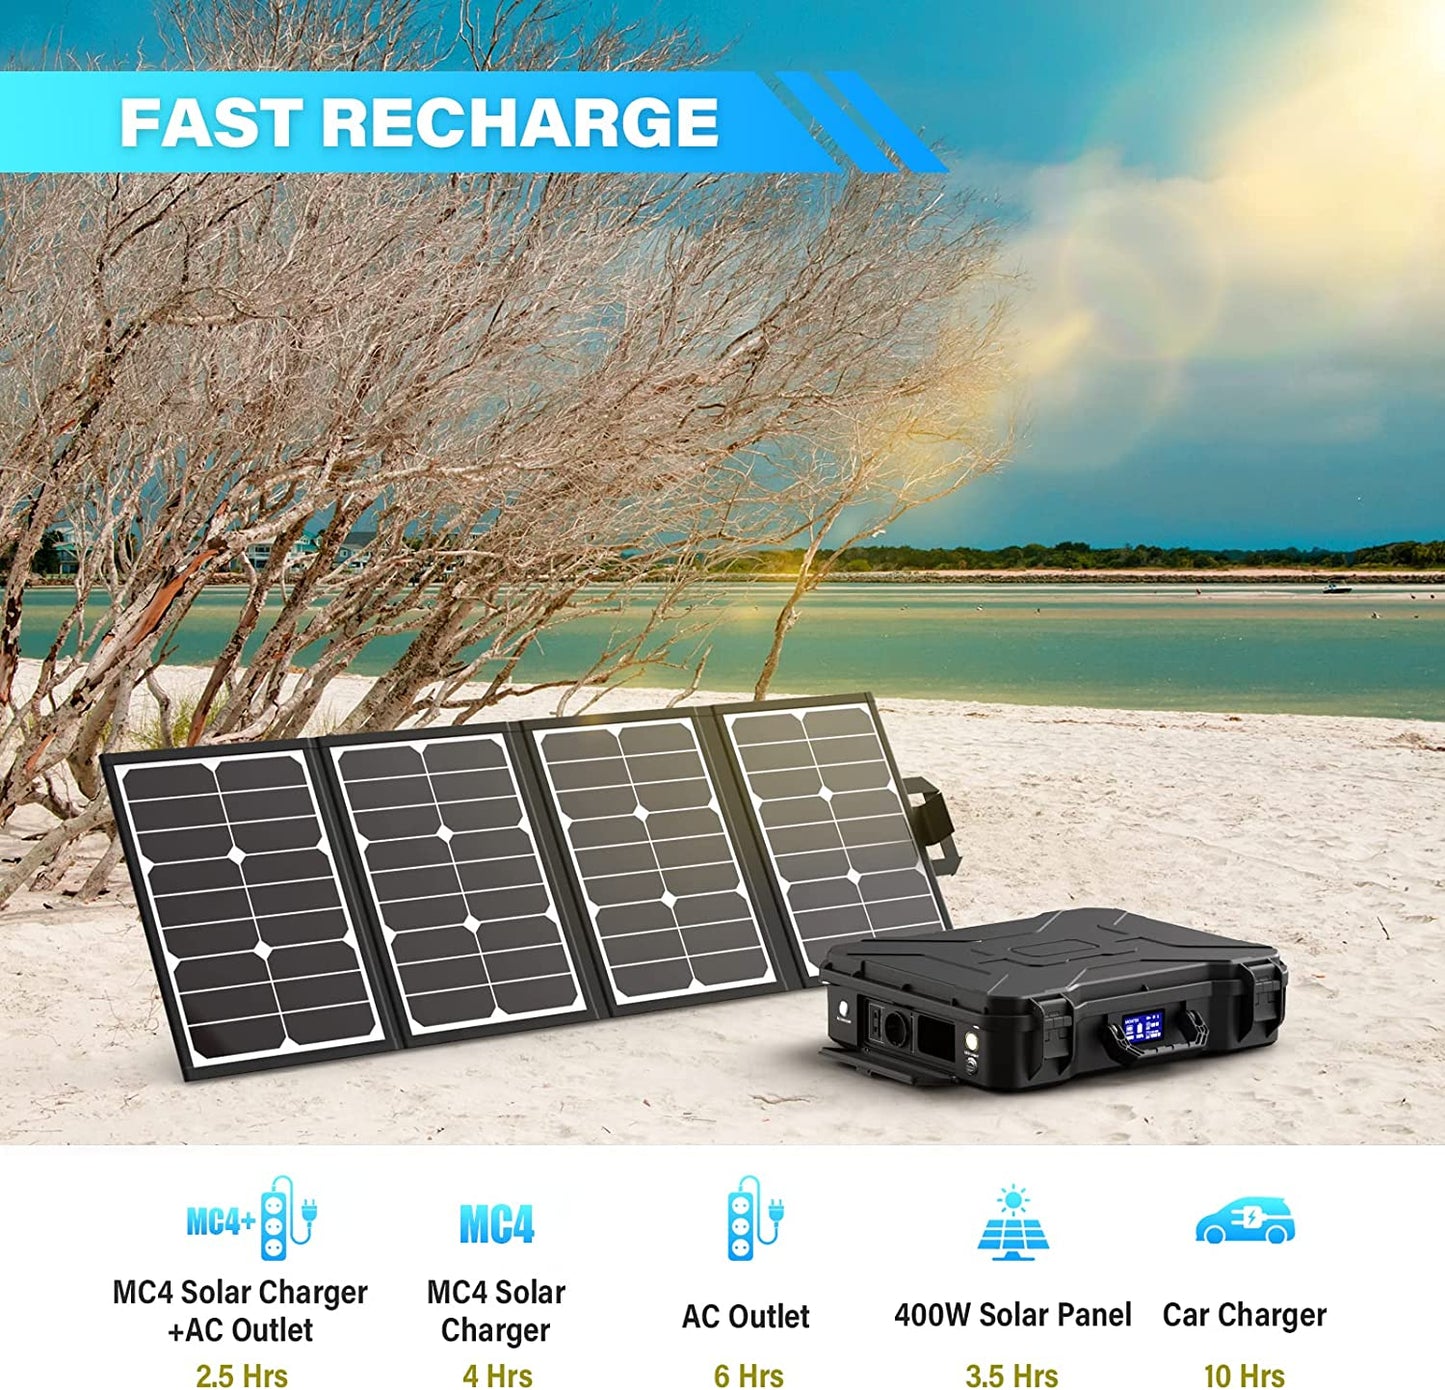 MONTEK X1000 Portable Power Station, Solar Generator with 1010Wh, 2x1000W AC & 100W PD Port, 2.5H to Full Charge, Water Resistant, for Home Backup Battery, Outdoor RV, Camping, Emergencies